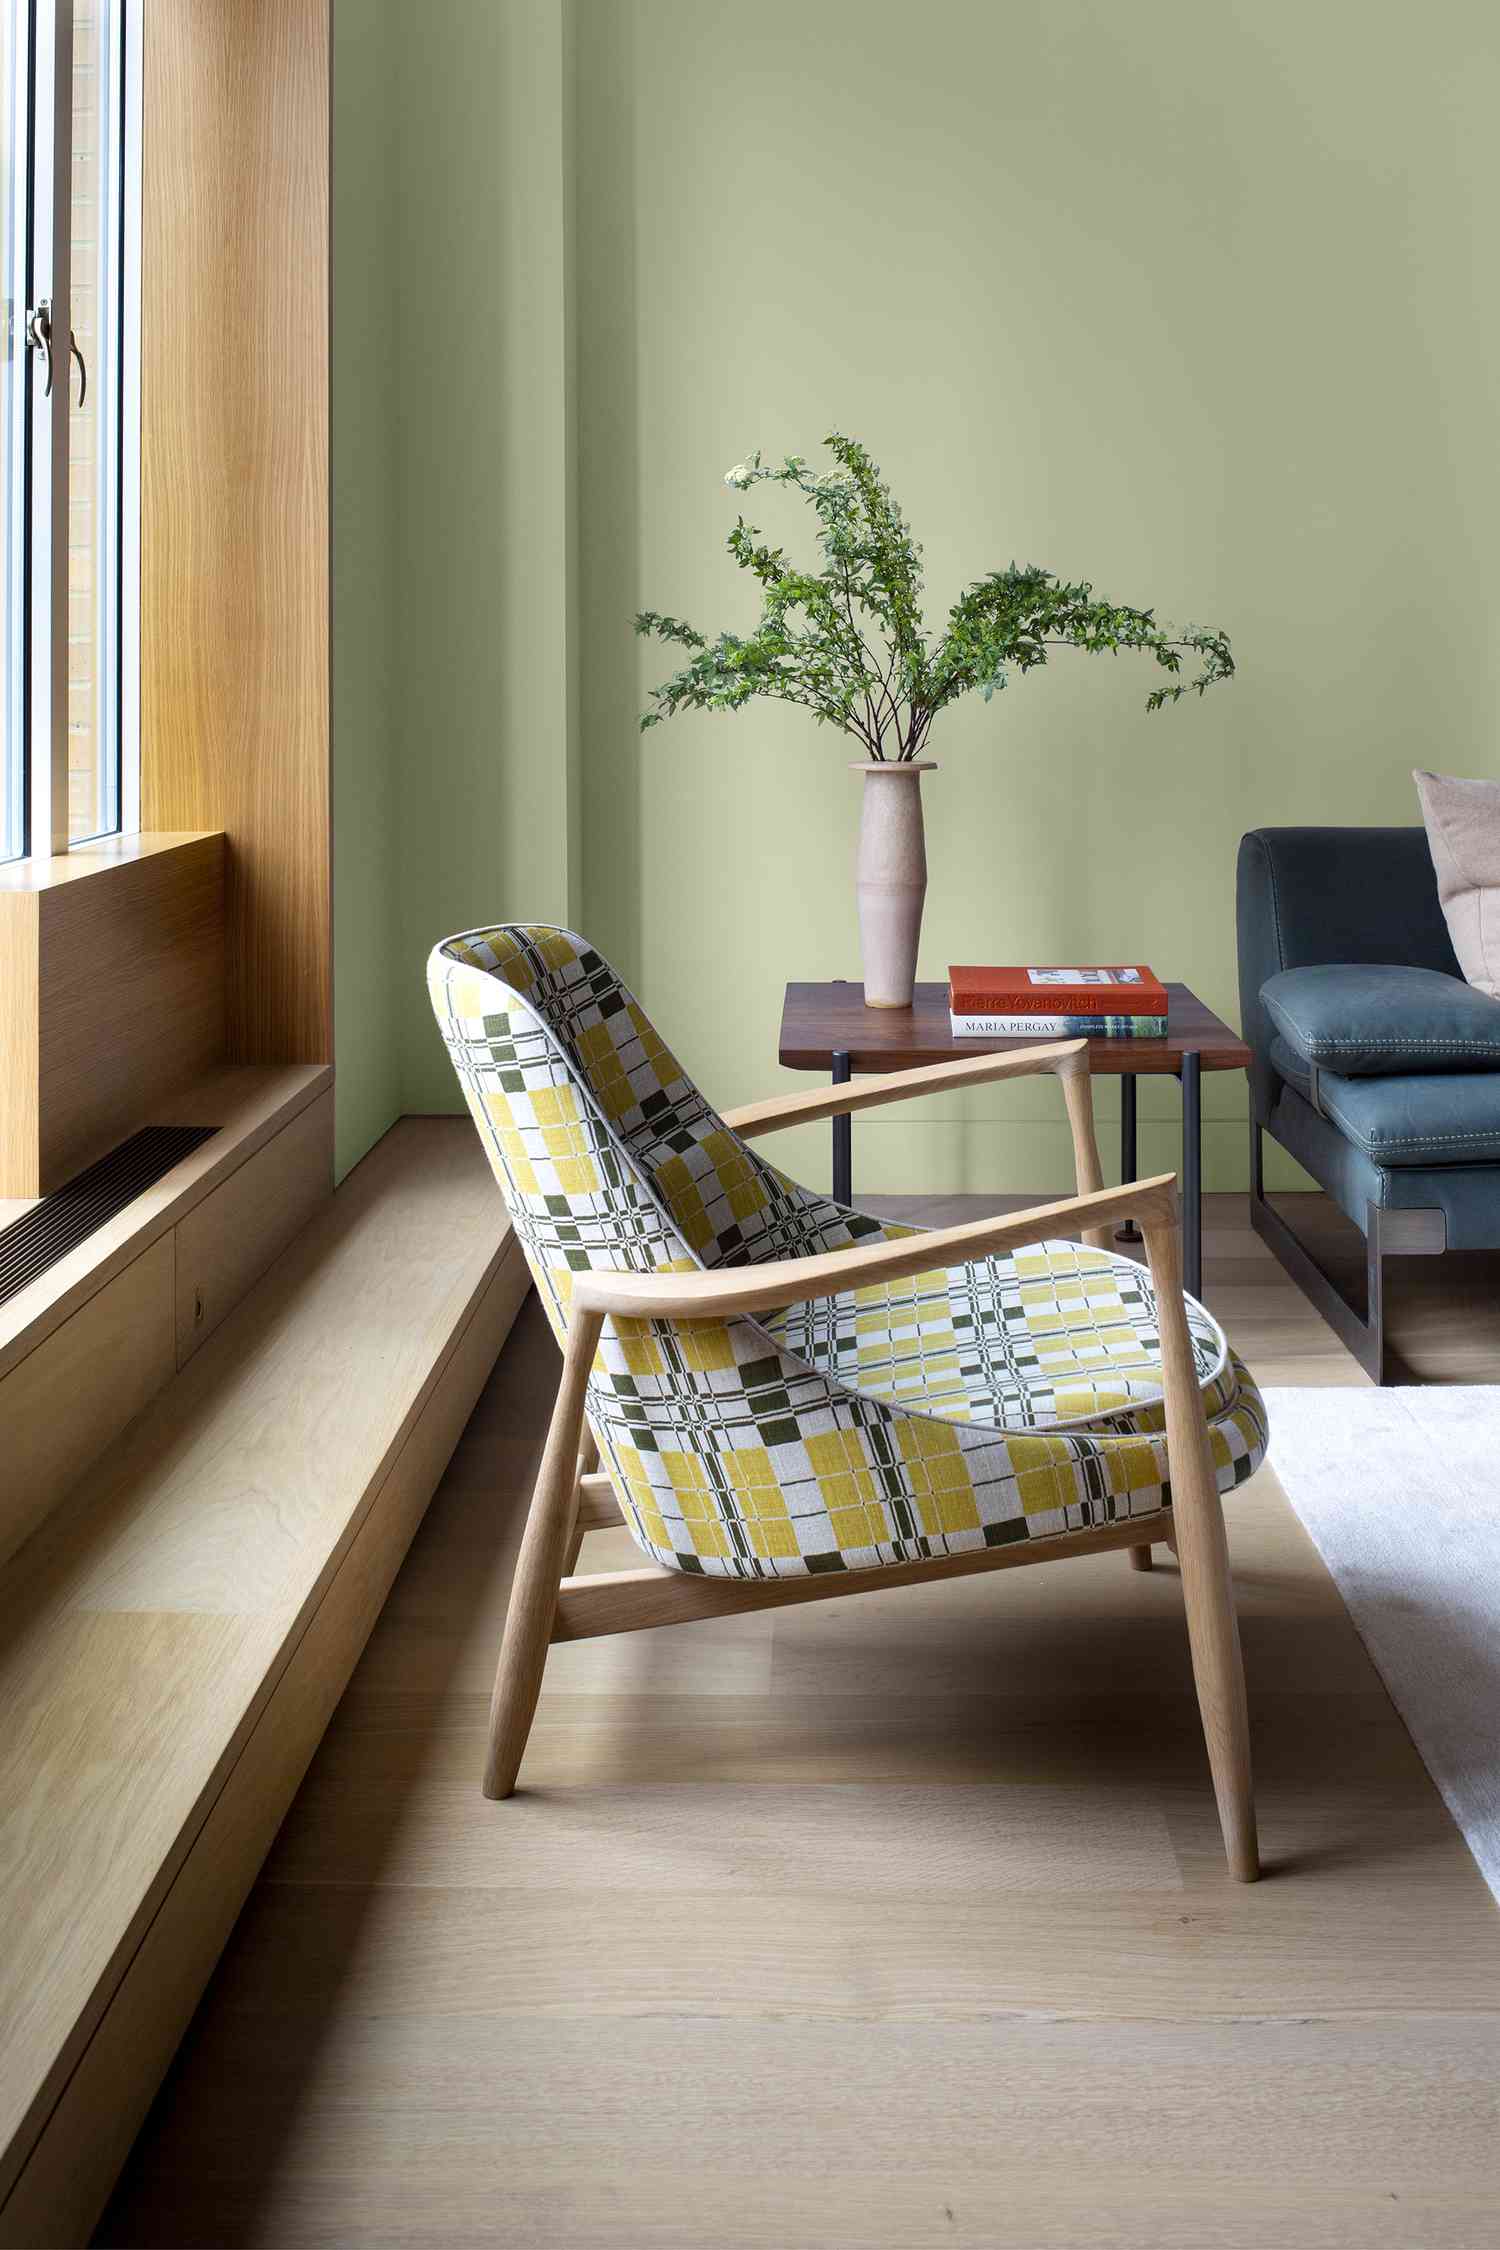 olive sprig is ppg's 2022 color of the year